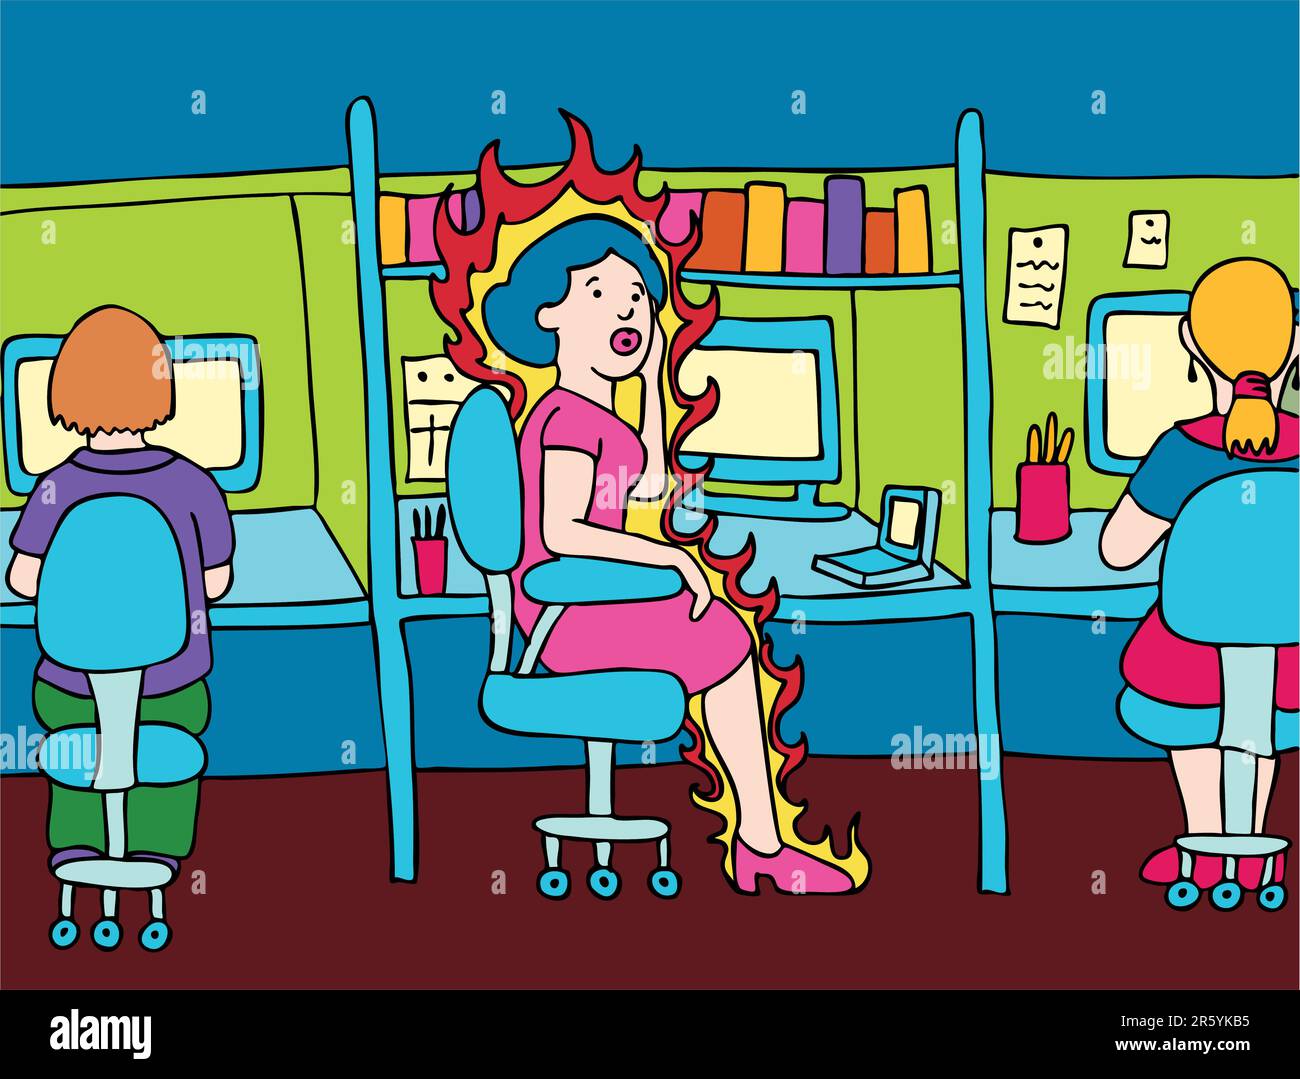 Menopausal woman experiences a hot flash while at work. Stock Vector